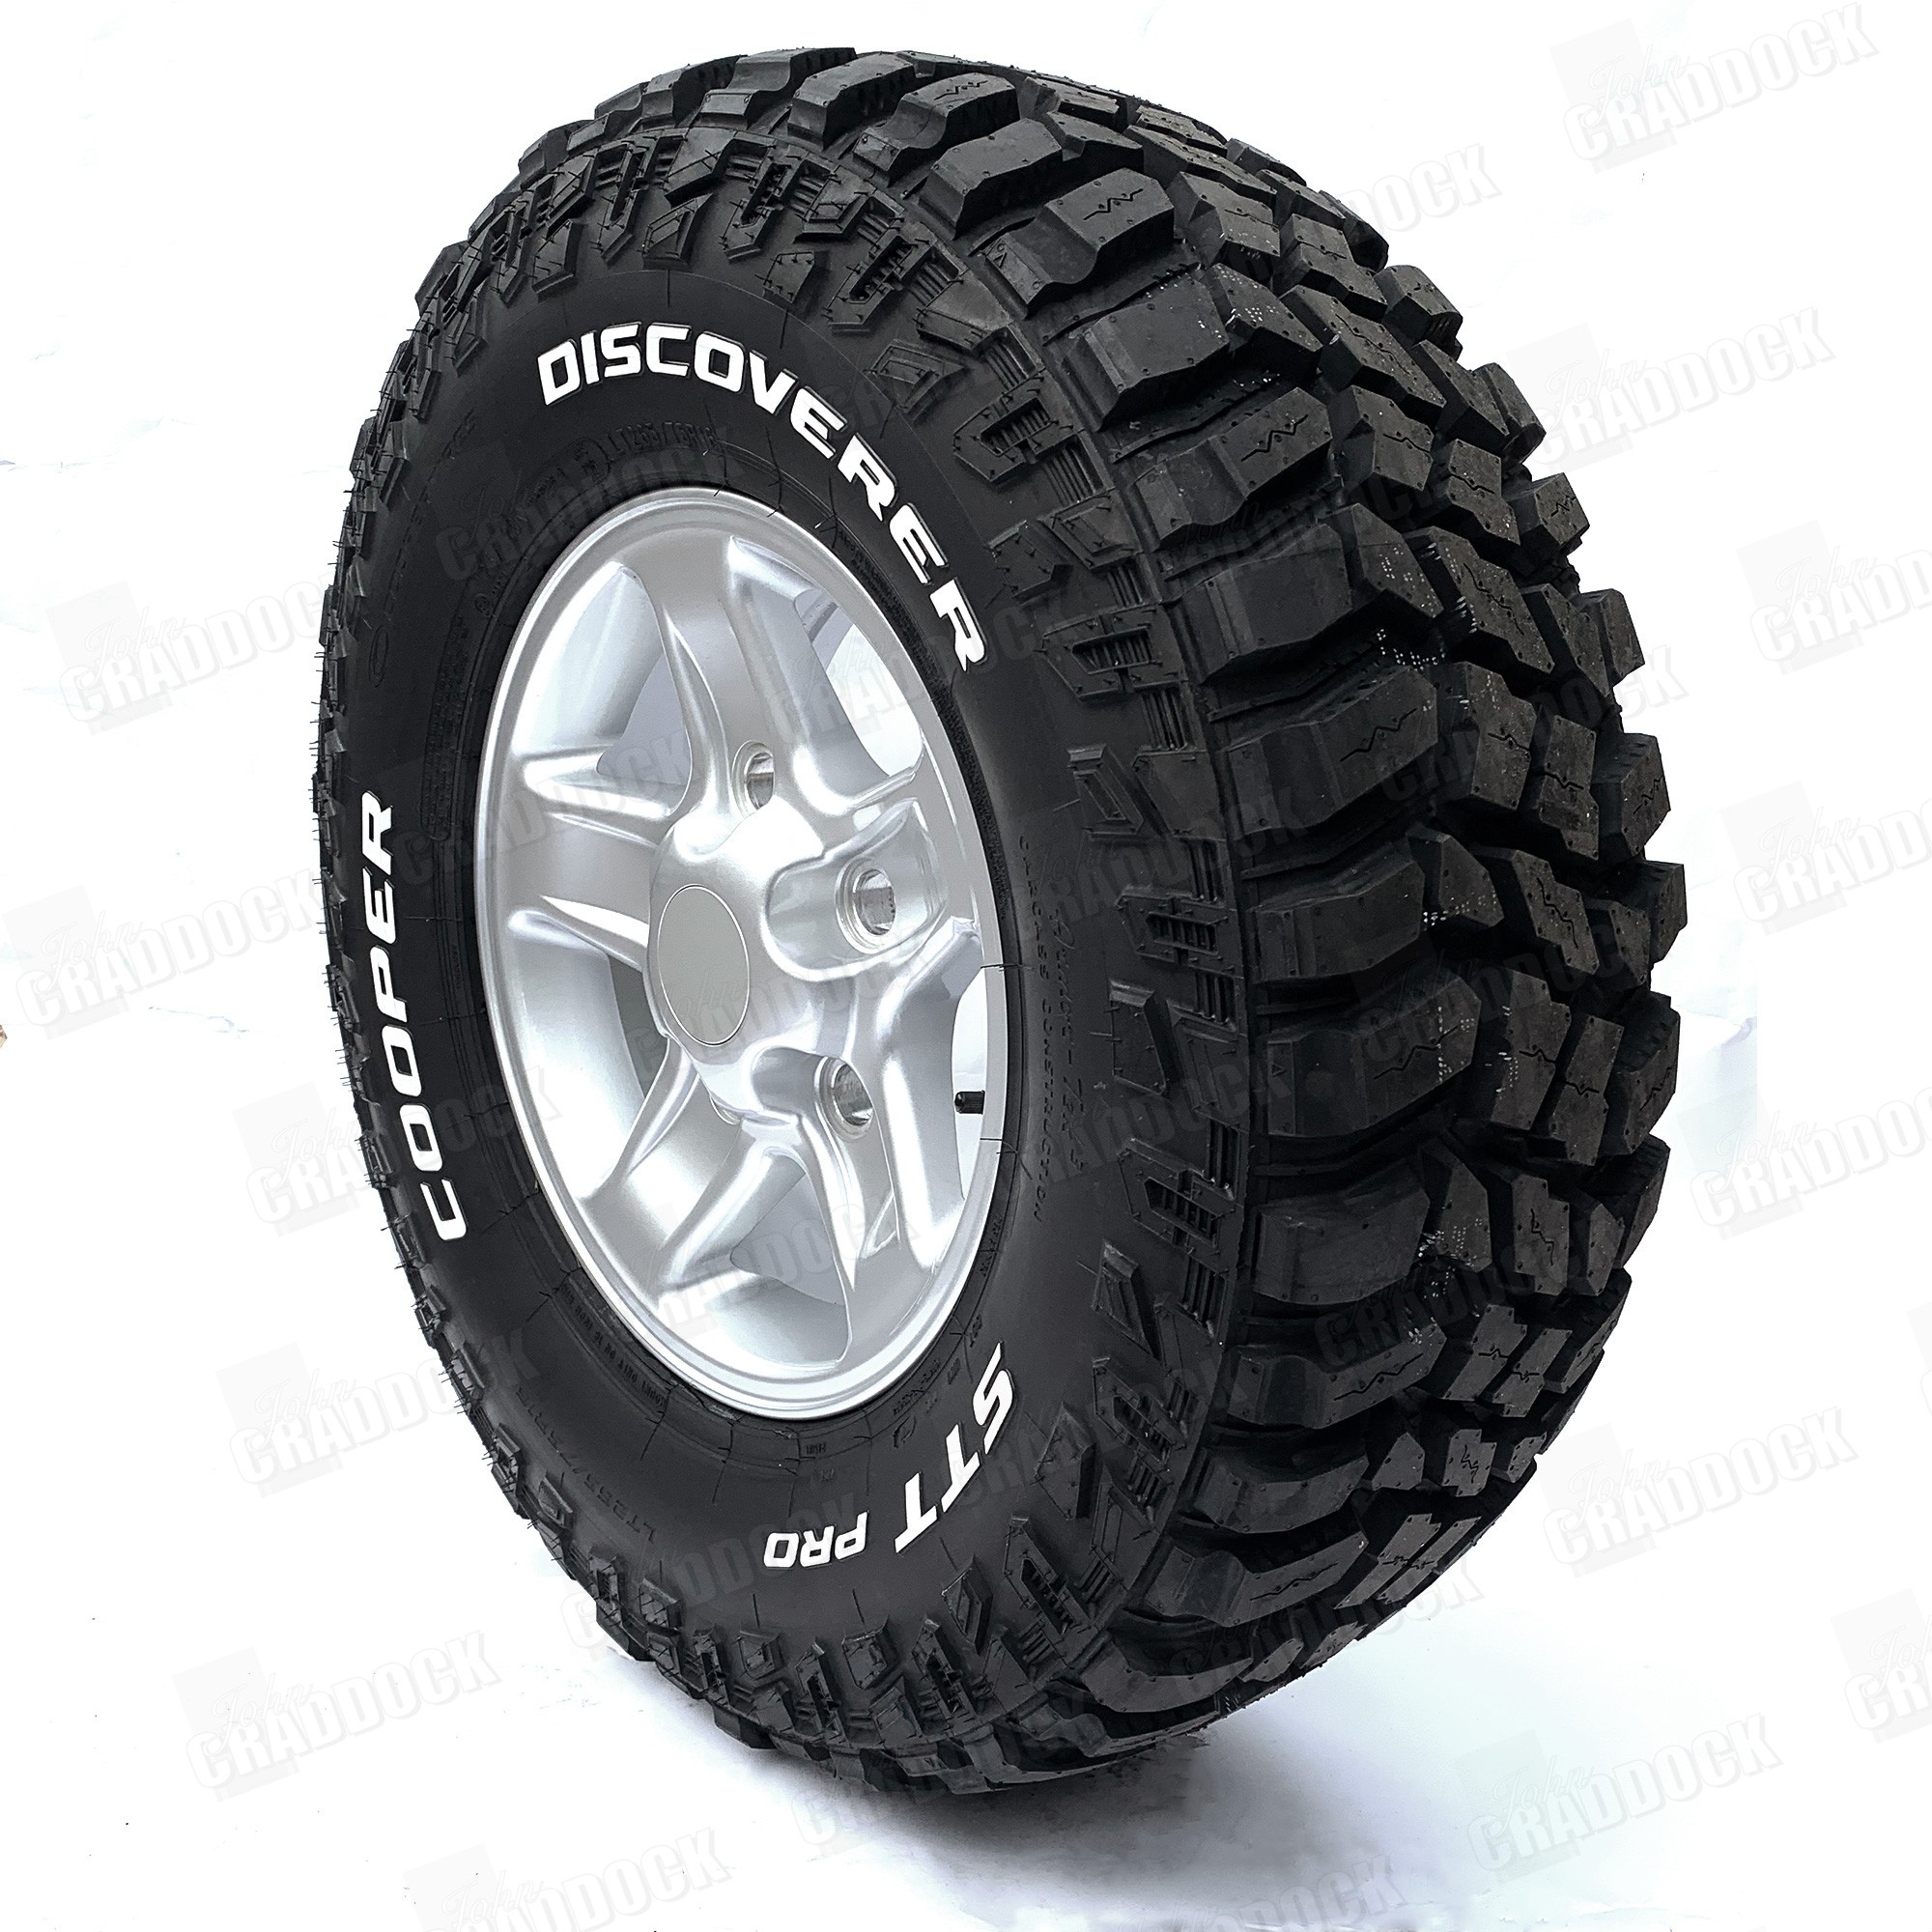 APD0095 - 265/75R16 Cooper Discoverer Stt Pro Fitted on 7X16 Boost Style  Alloy Wheels and Nuts with Uk Delivery (Restrictions Apply) Set Of Four